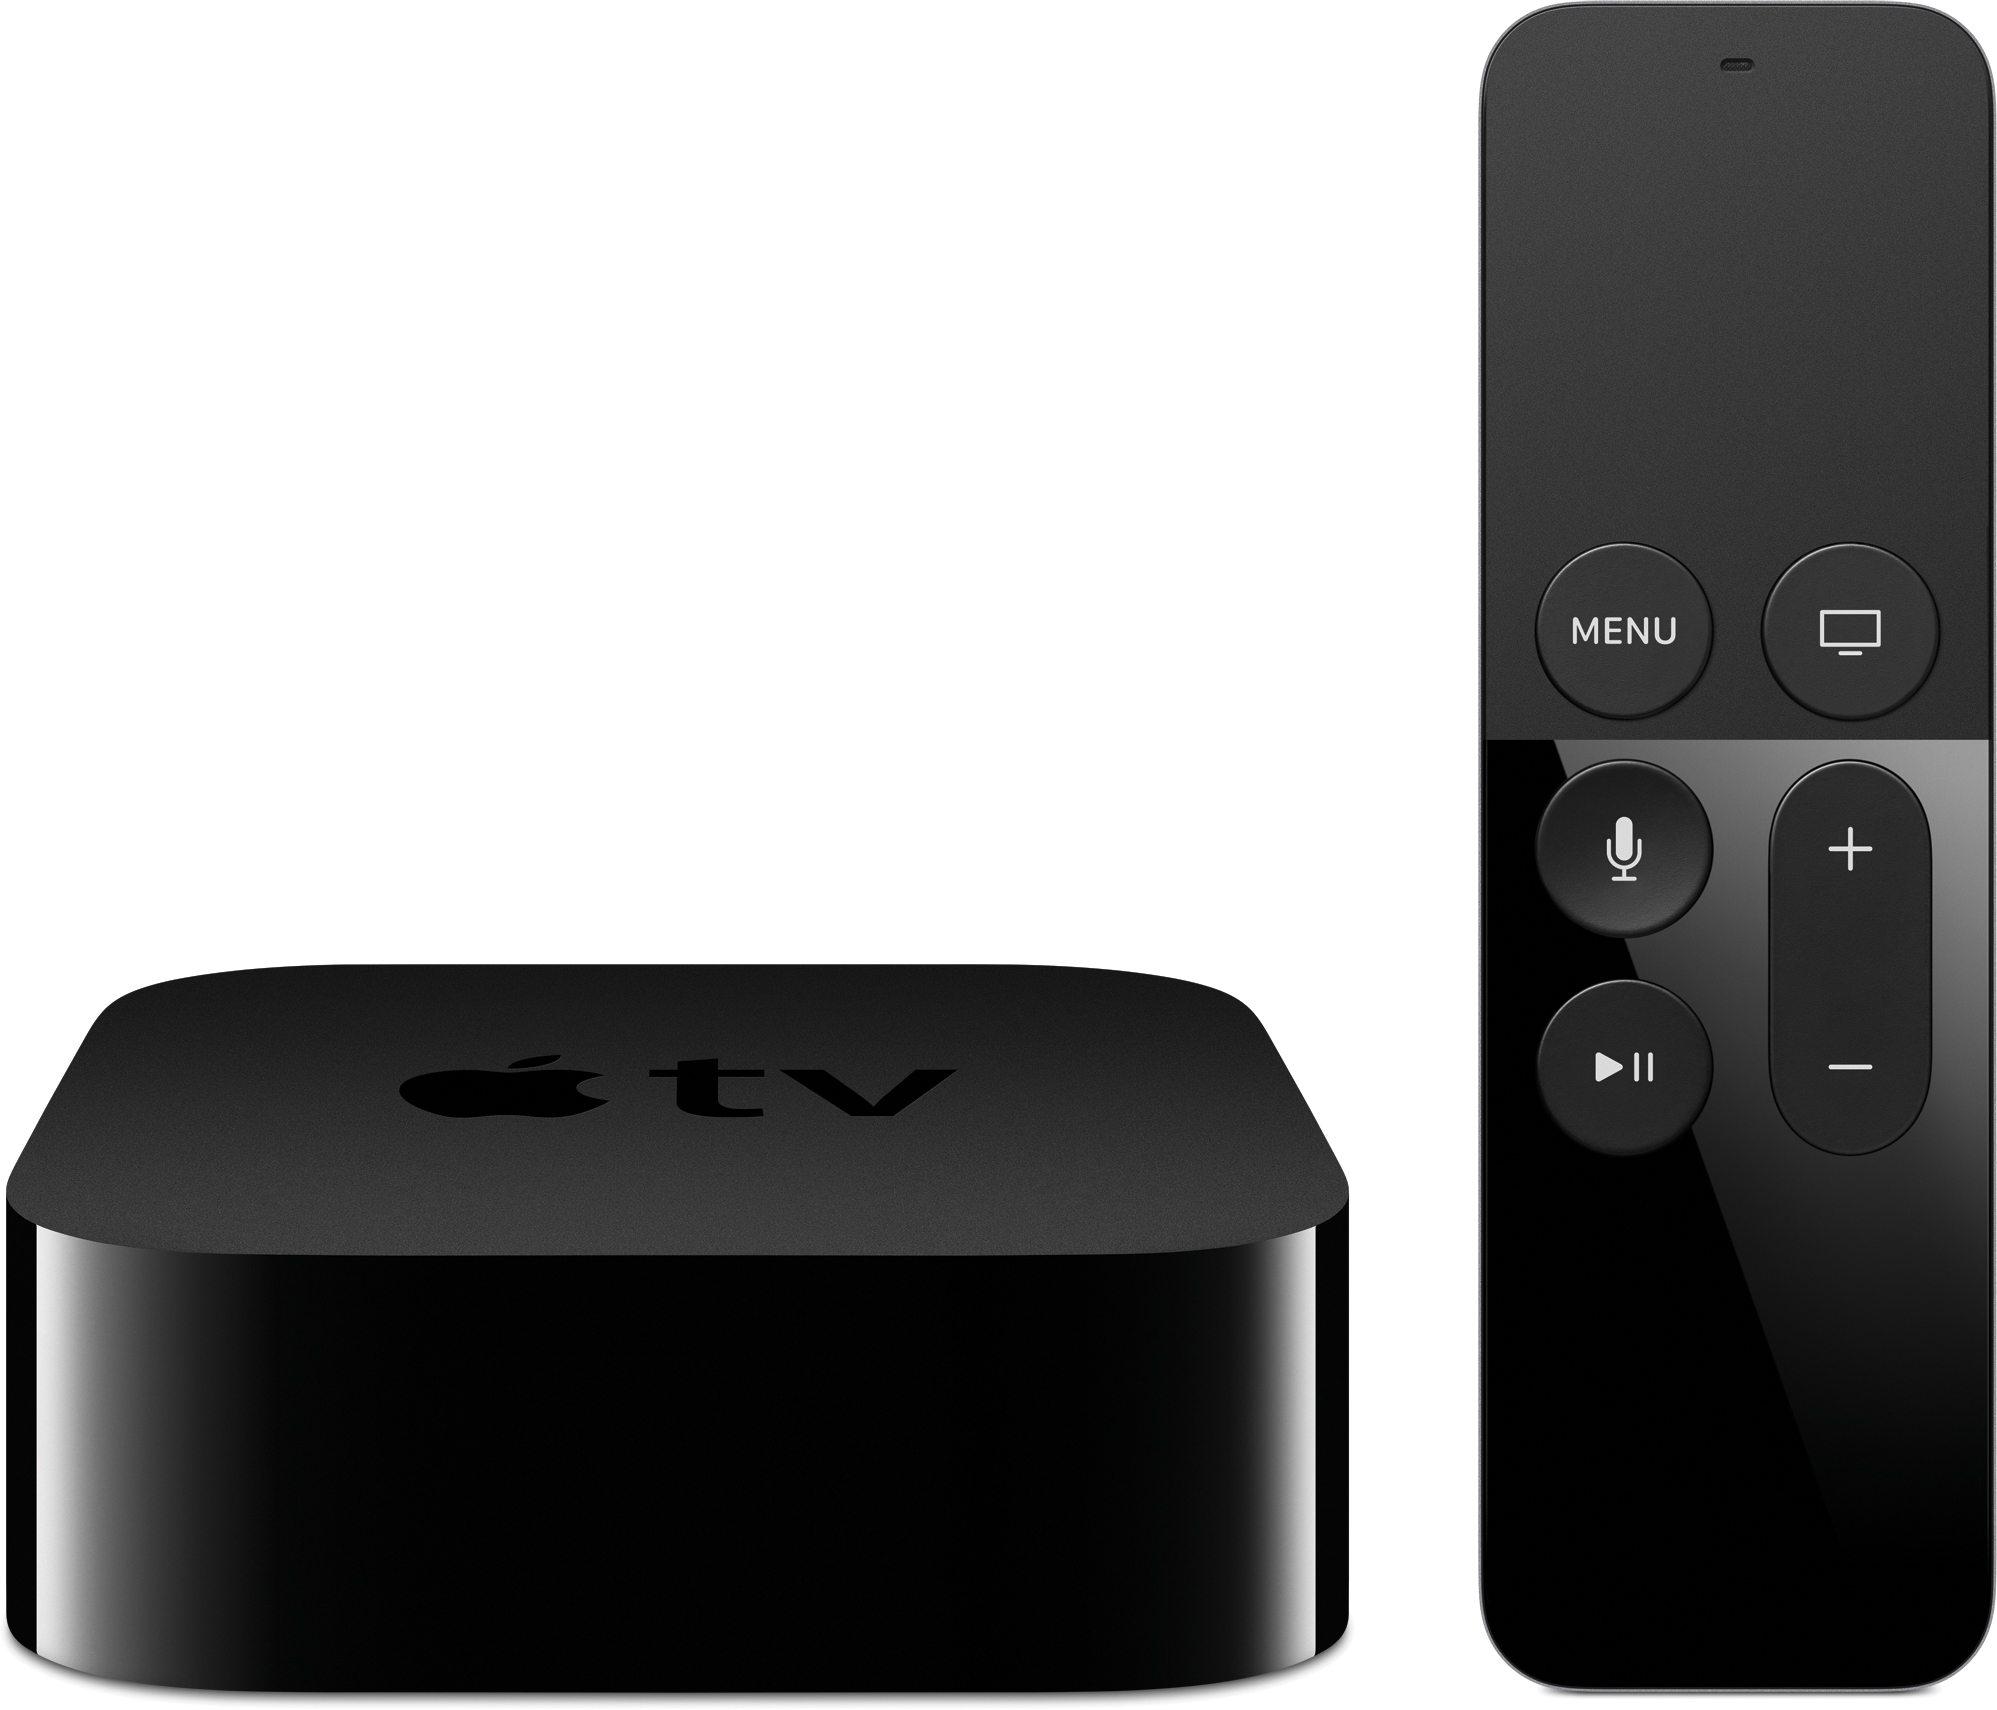 New Apple TV starts to be sold online, including in Brazil; 32GB model costs R $ 1,349 [atualizado 2x]